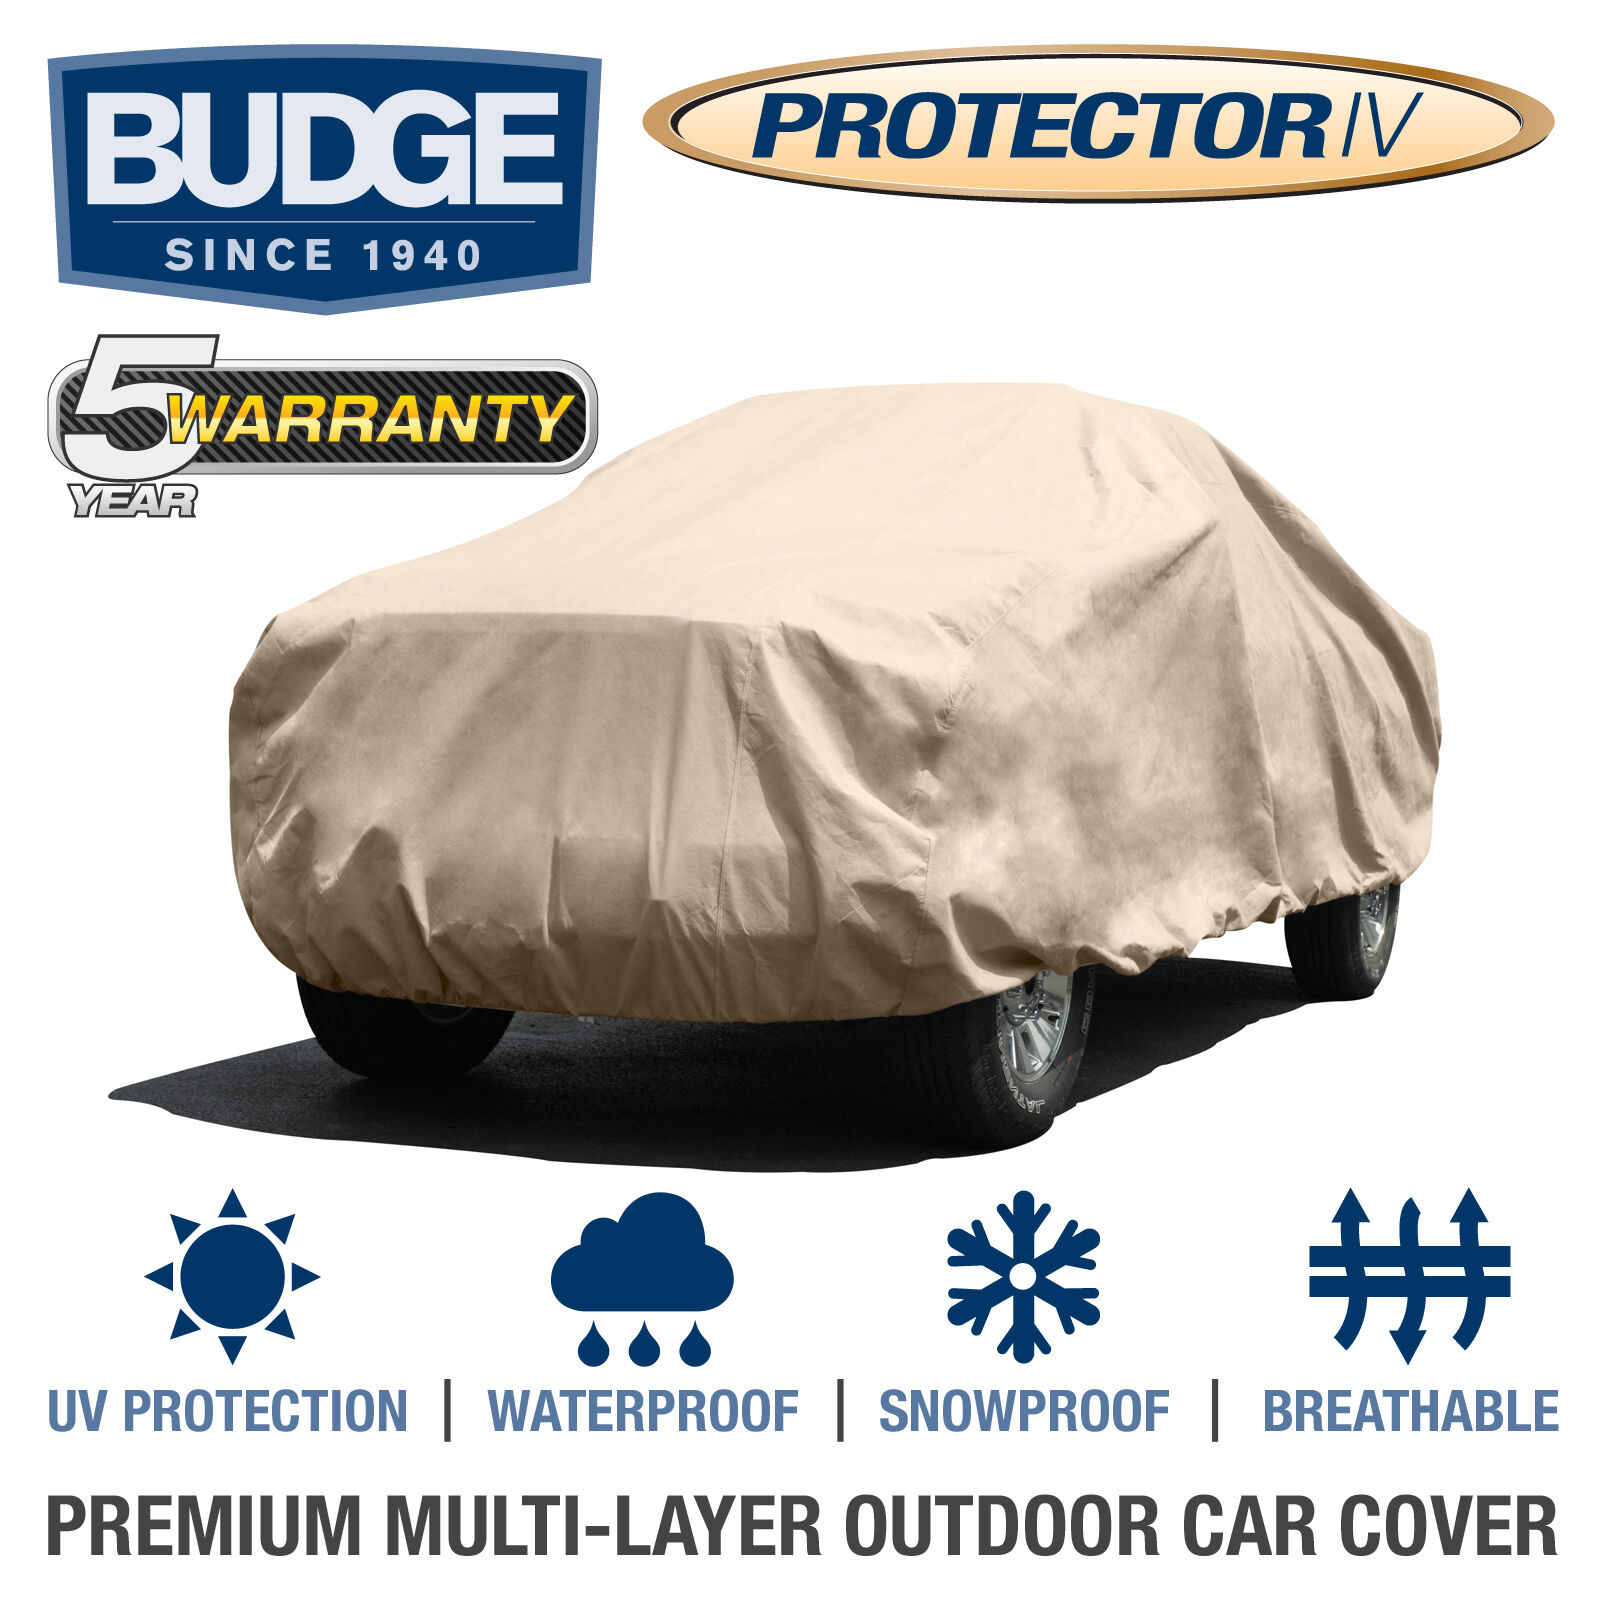 Budge Protector IV Truck Cover Fits Standard Cab Short Bed up to 18\'1\